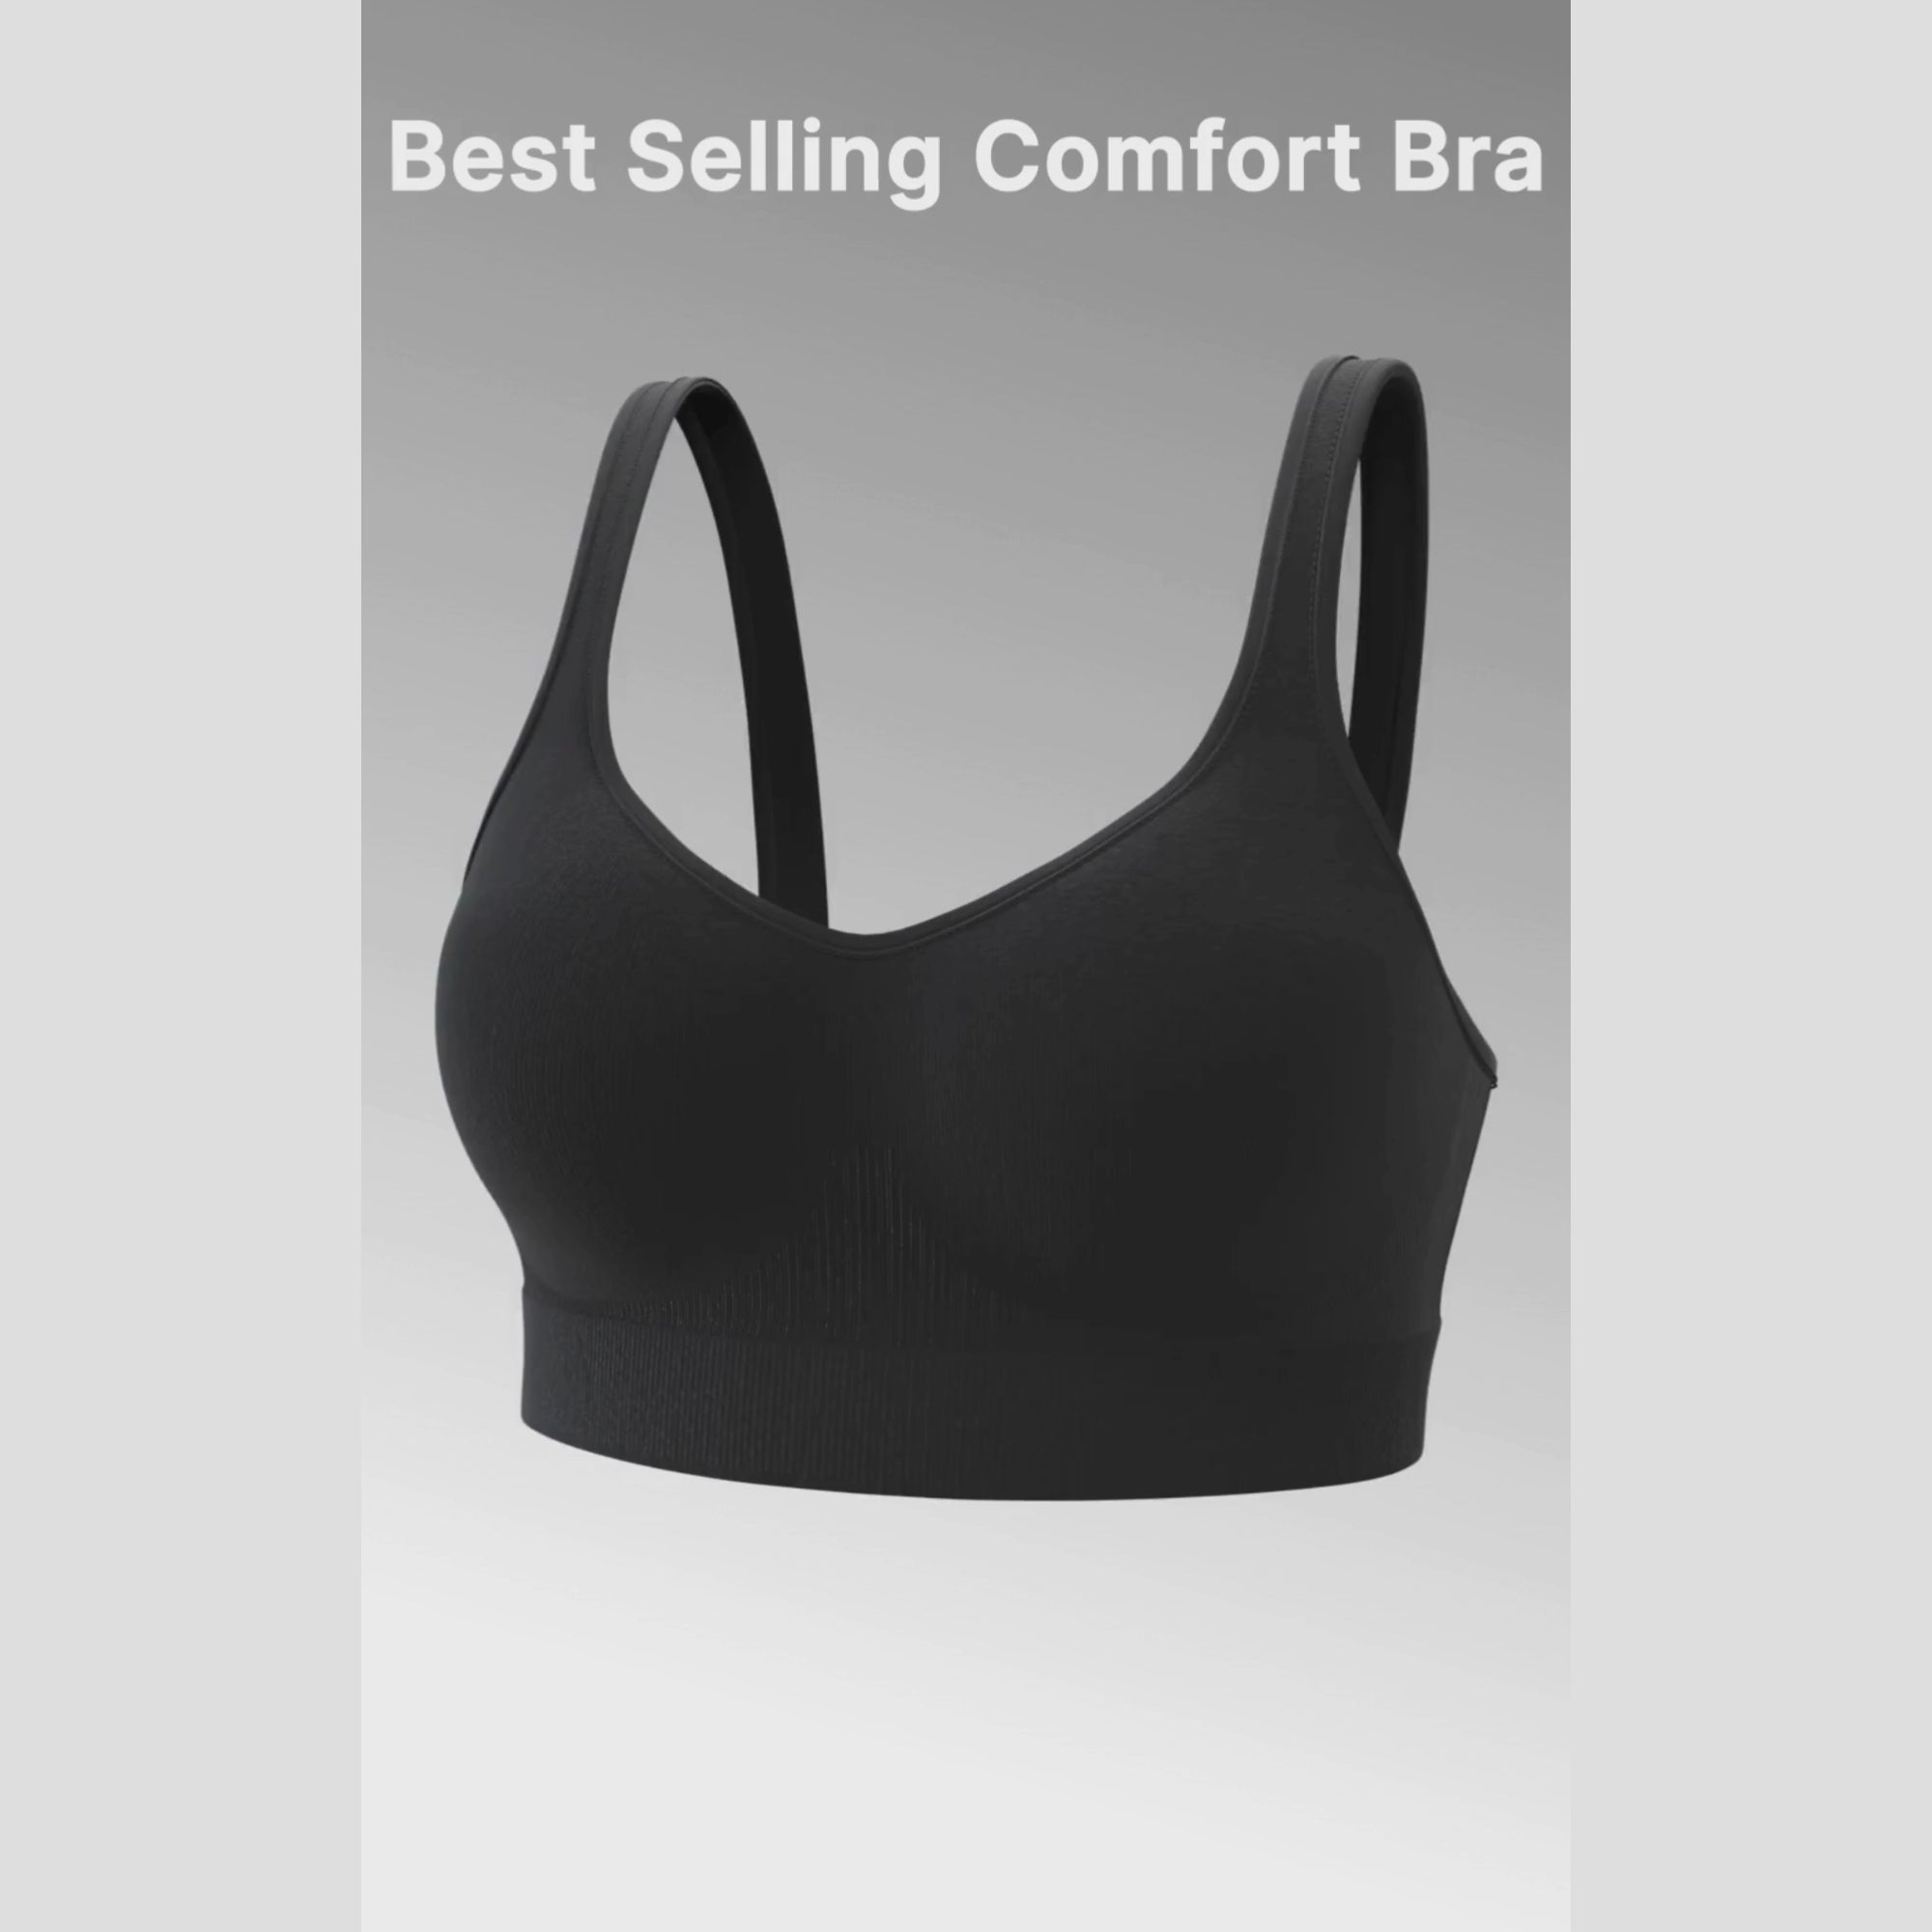 Shaper Bra - Chatham Outfitters